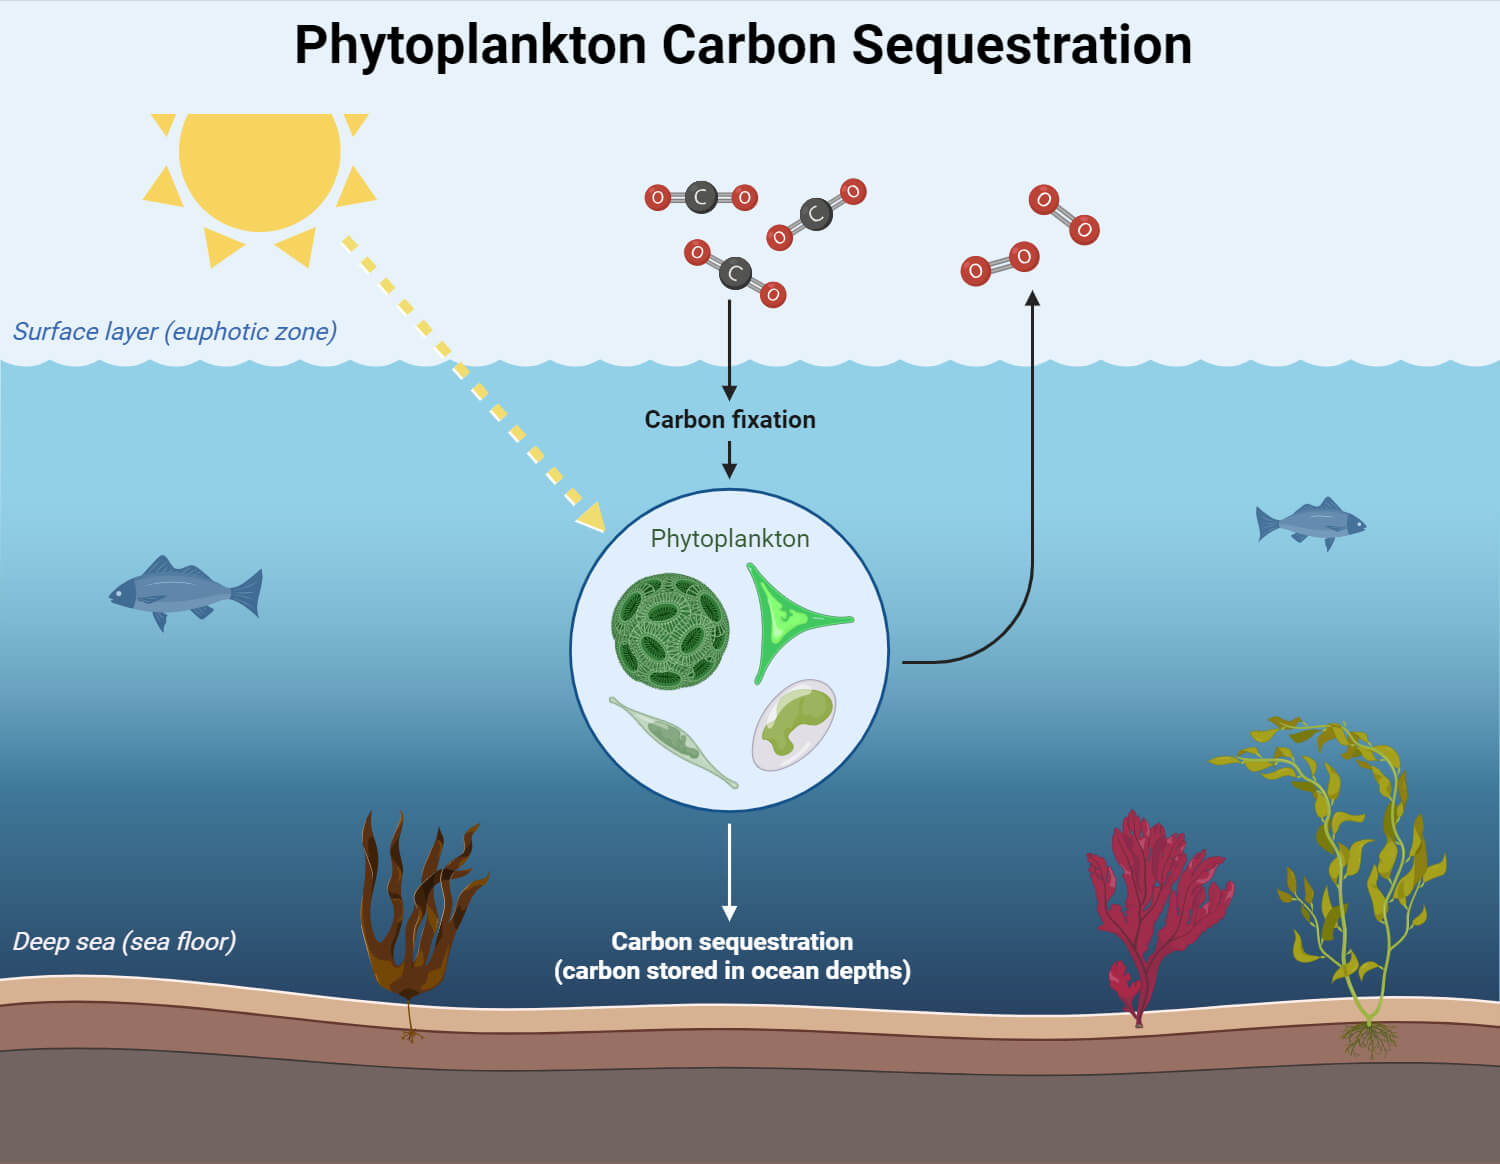 Phytoplankton Carbon Sequestration